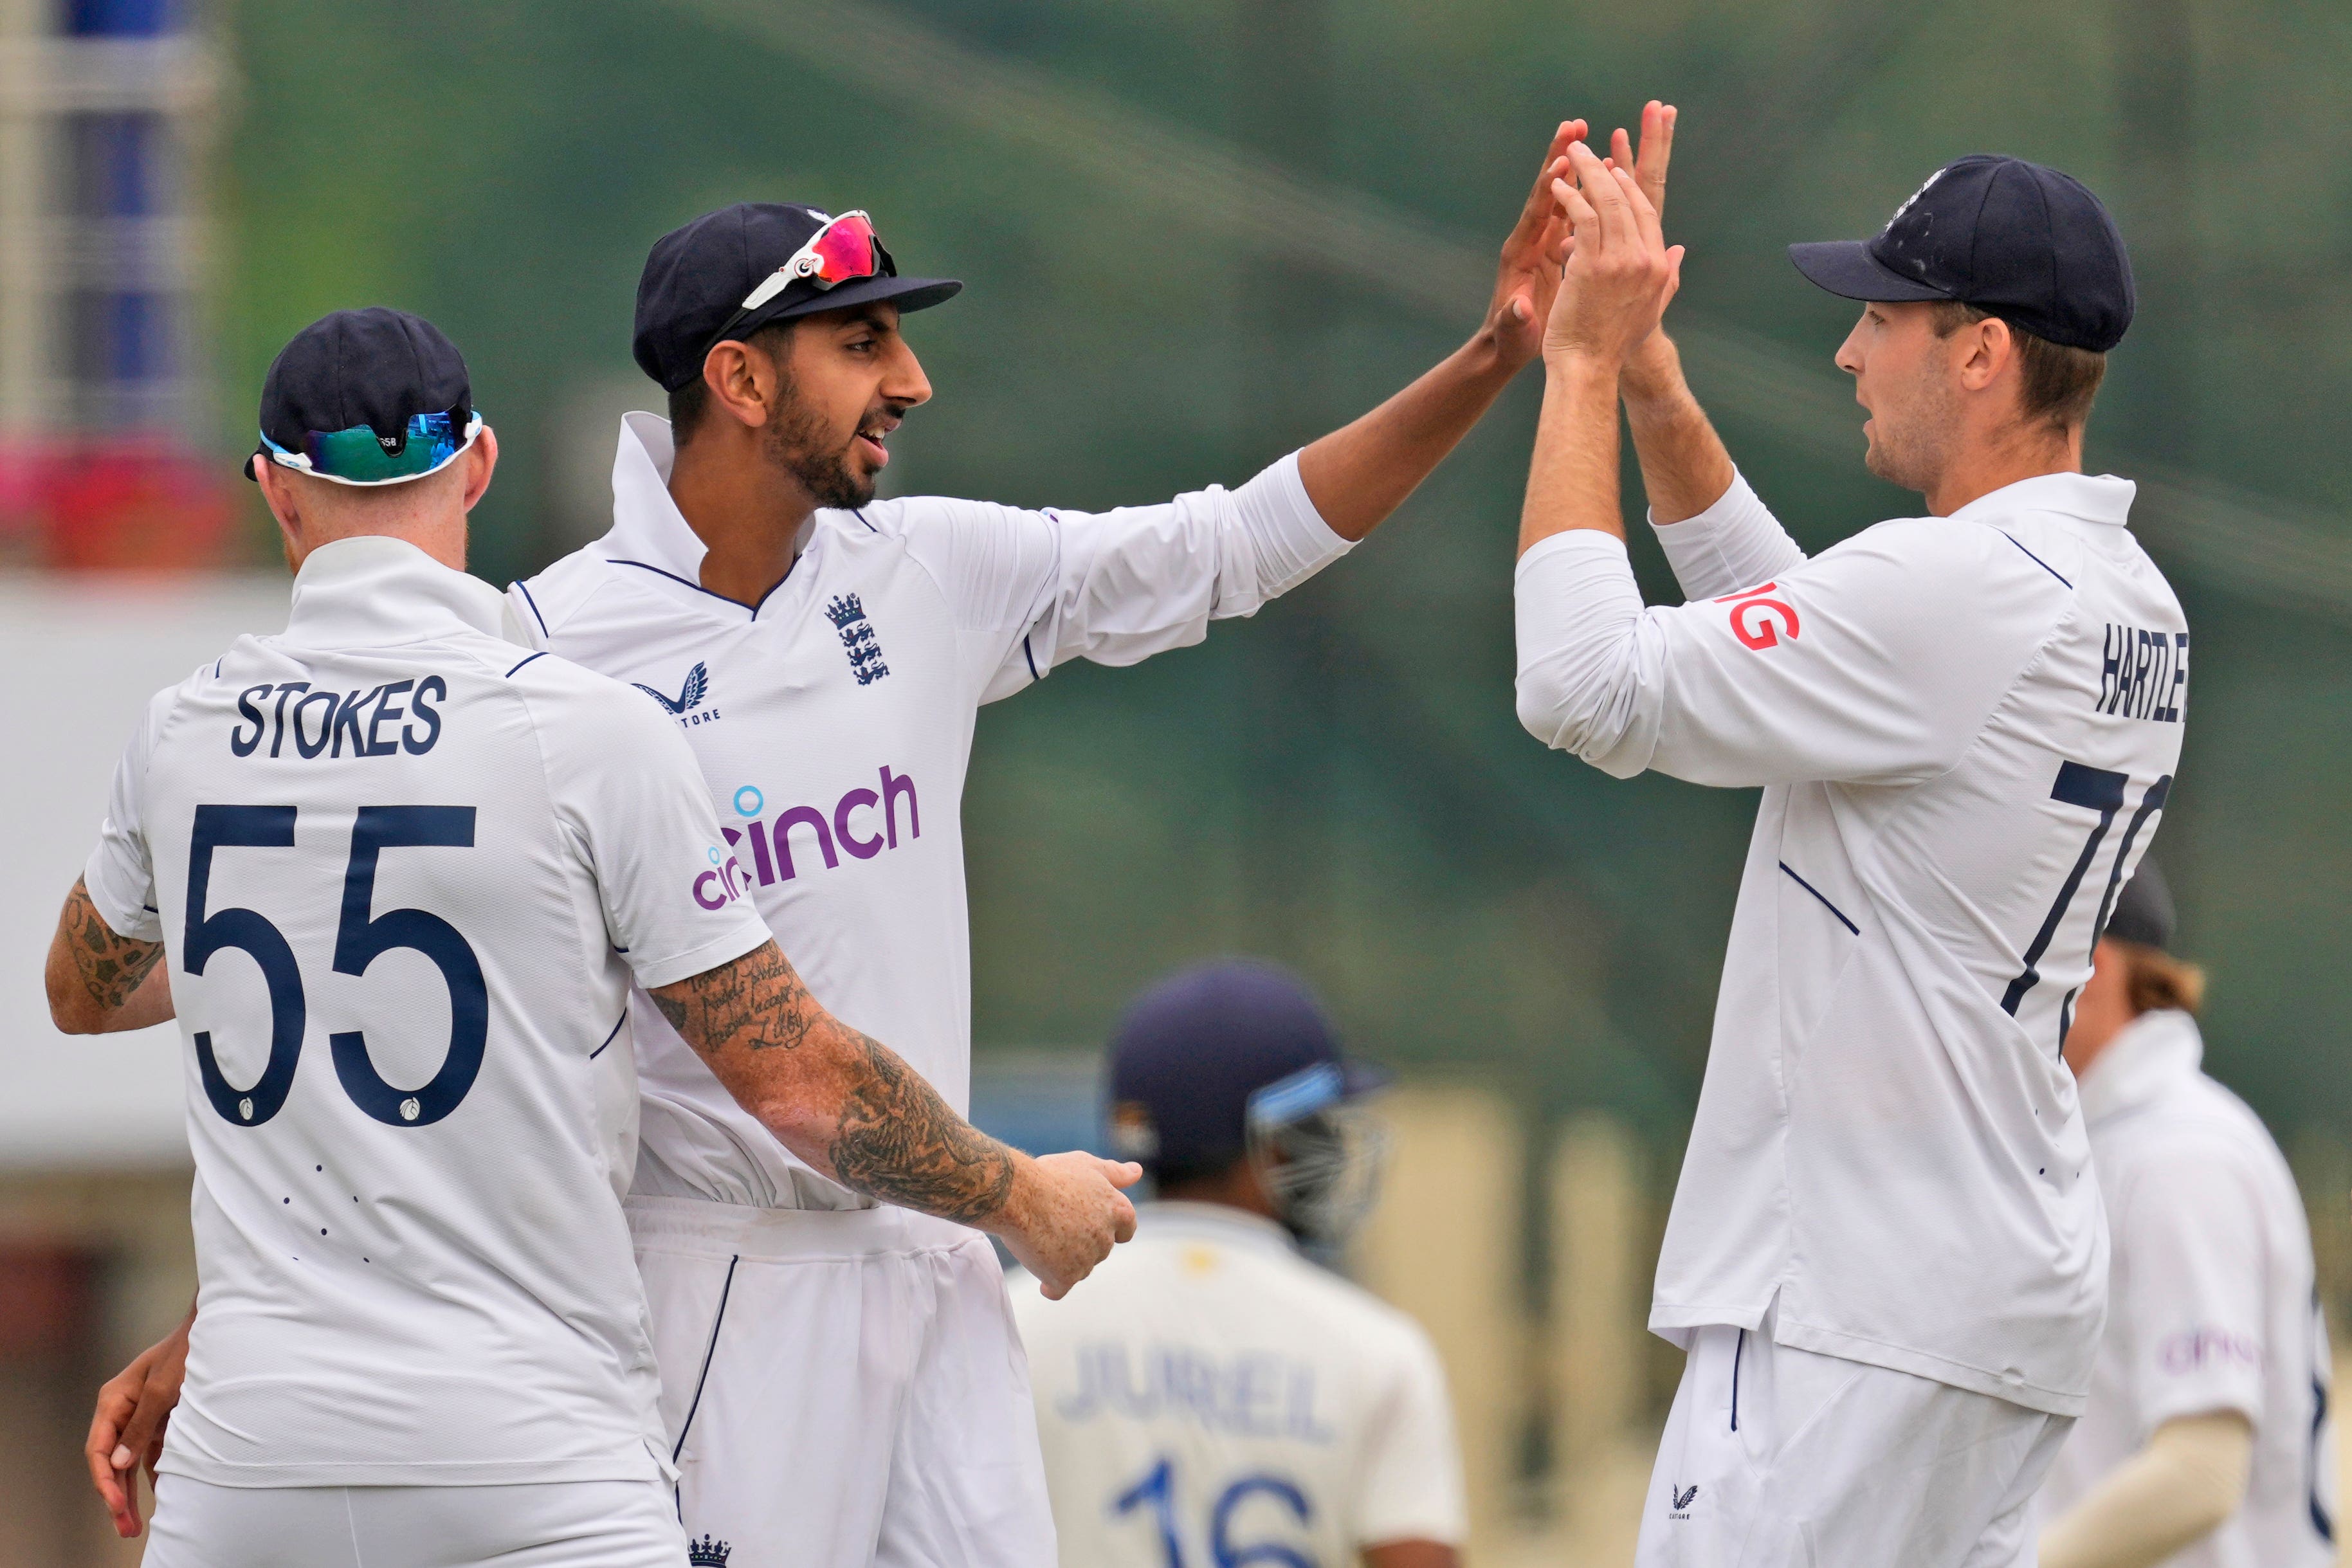 Spinners Tom Hartley, right, and Shoaib Bashir, centre, have been bright spots on a difficult tour